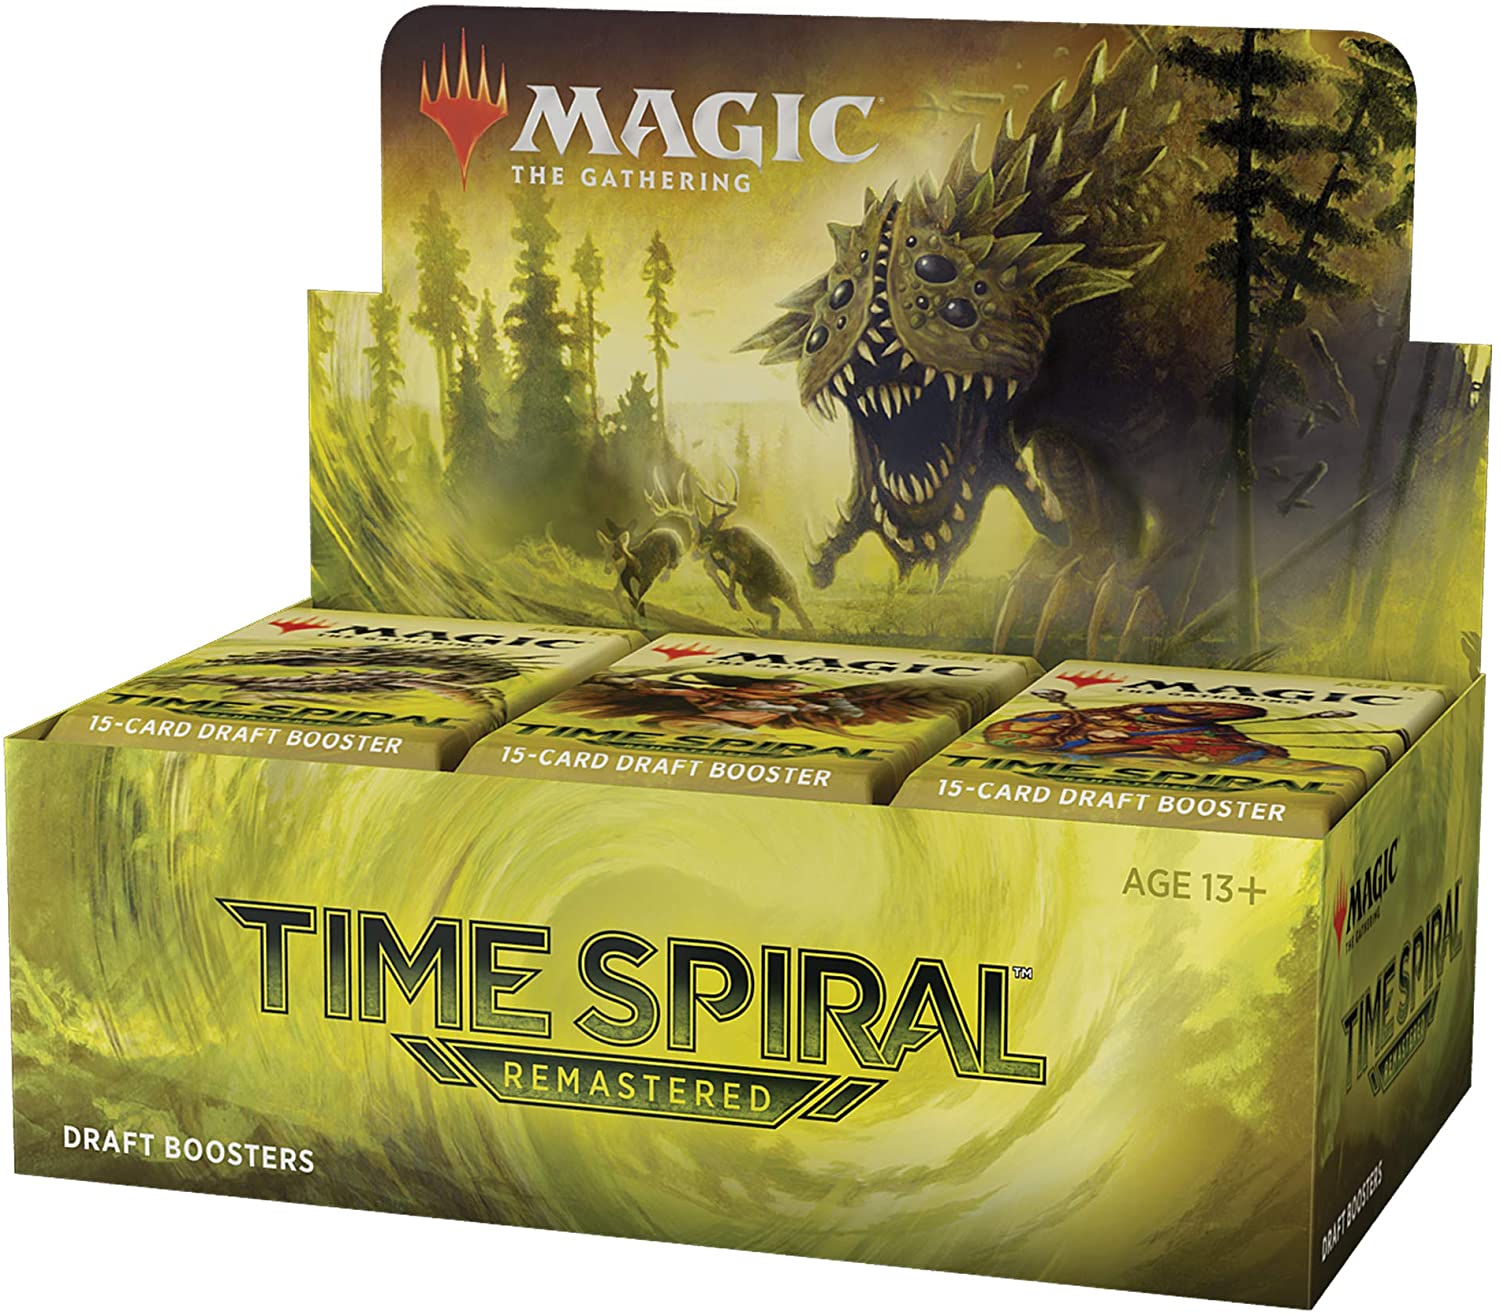 Magic: the Gathering Time Spiral Remastered Booster Box